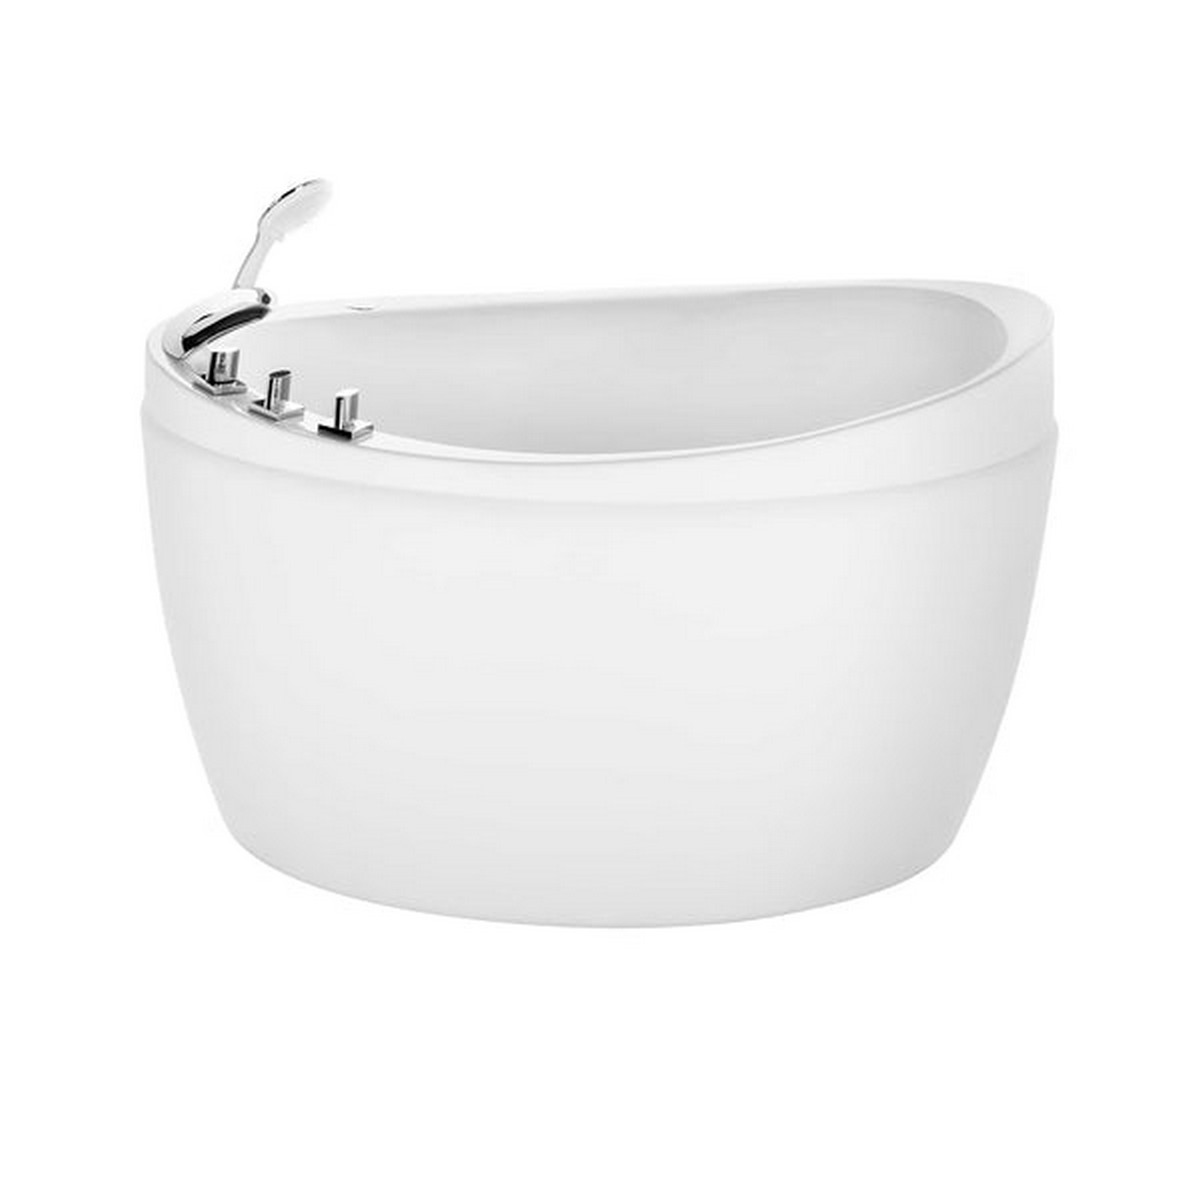 EMPAVA EMPV-59FT002 59 X 31 1/2 INCH FREESTANDING JAPANESE STYLE SOAKING BATHTUB WITH REVERSIBLE DRAIN IN WHITE